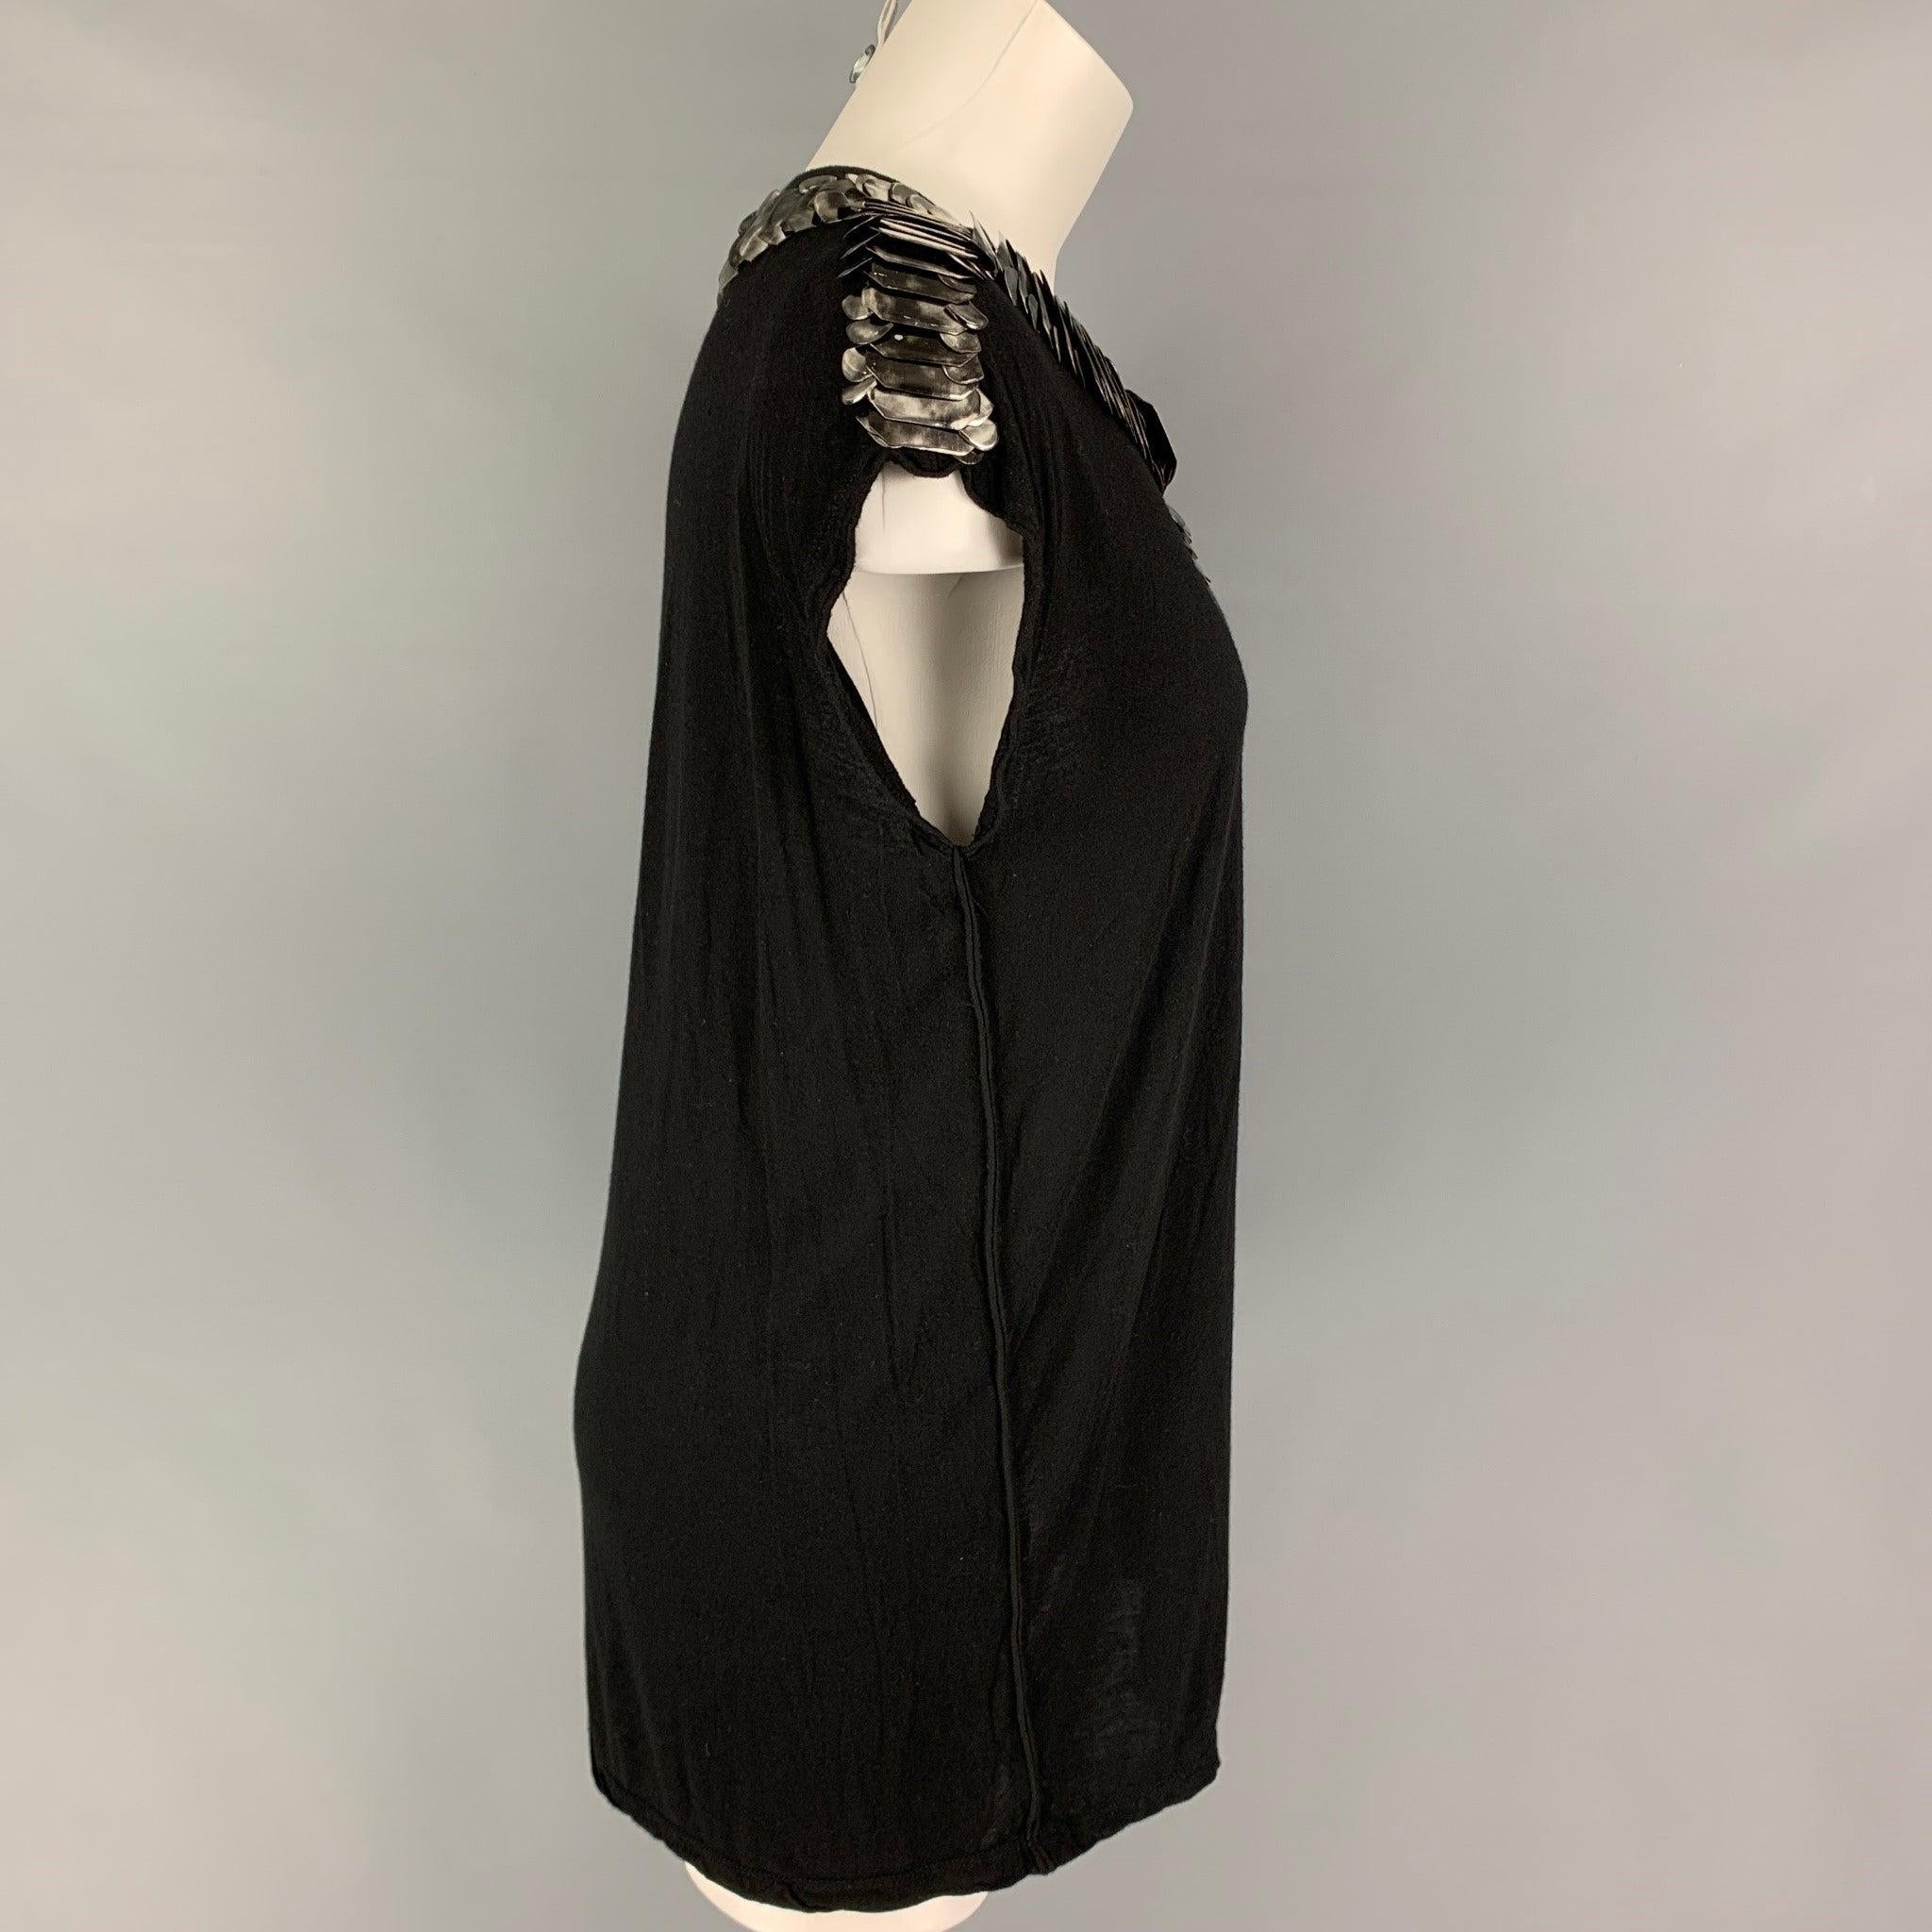 GIVENCHY t-shirt comes in a black viscose featuring a sleeveless style, silver tone applique details, and a crew-neck.
Very Good
Pre-Owned Condition. 

Marked:   M  

Measurements: 
 
Shoulder: 19 inches  Bust: 34 inches  Length: 28 inches 
  
  
